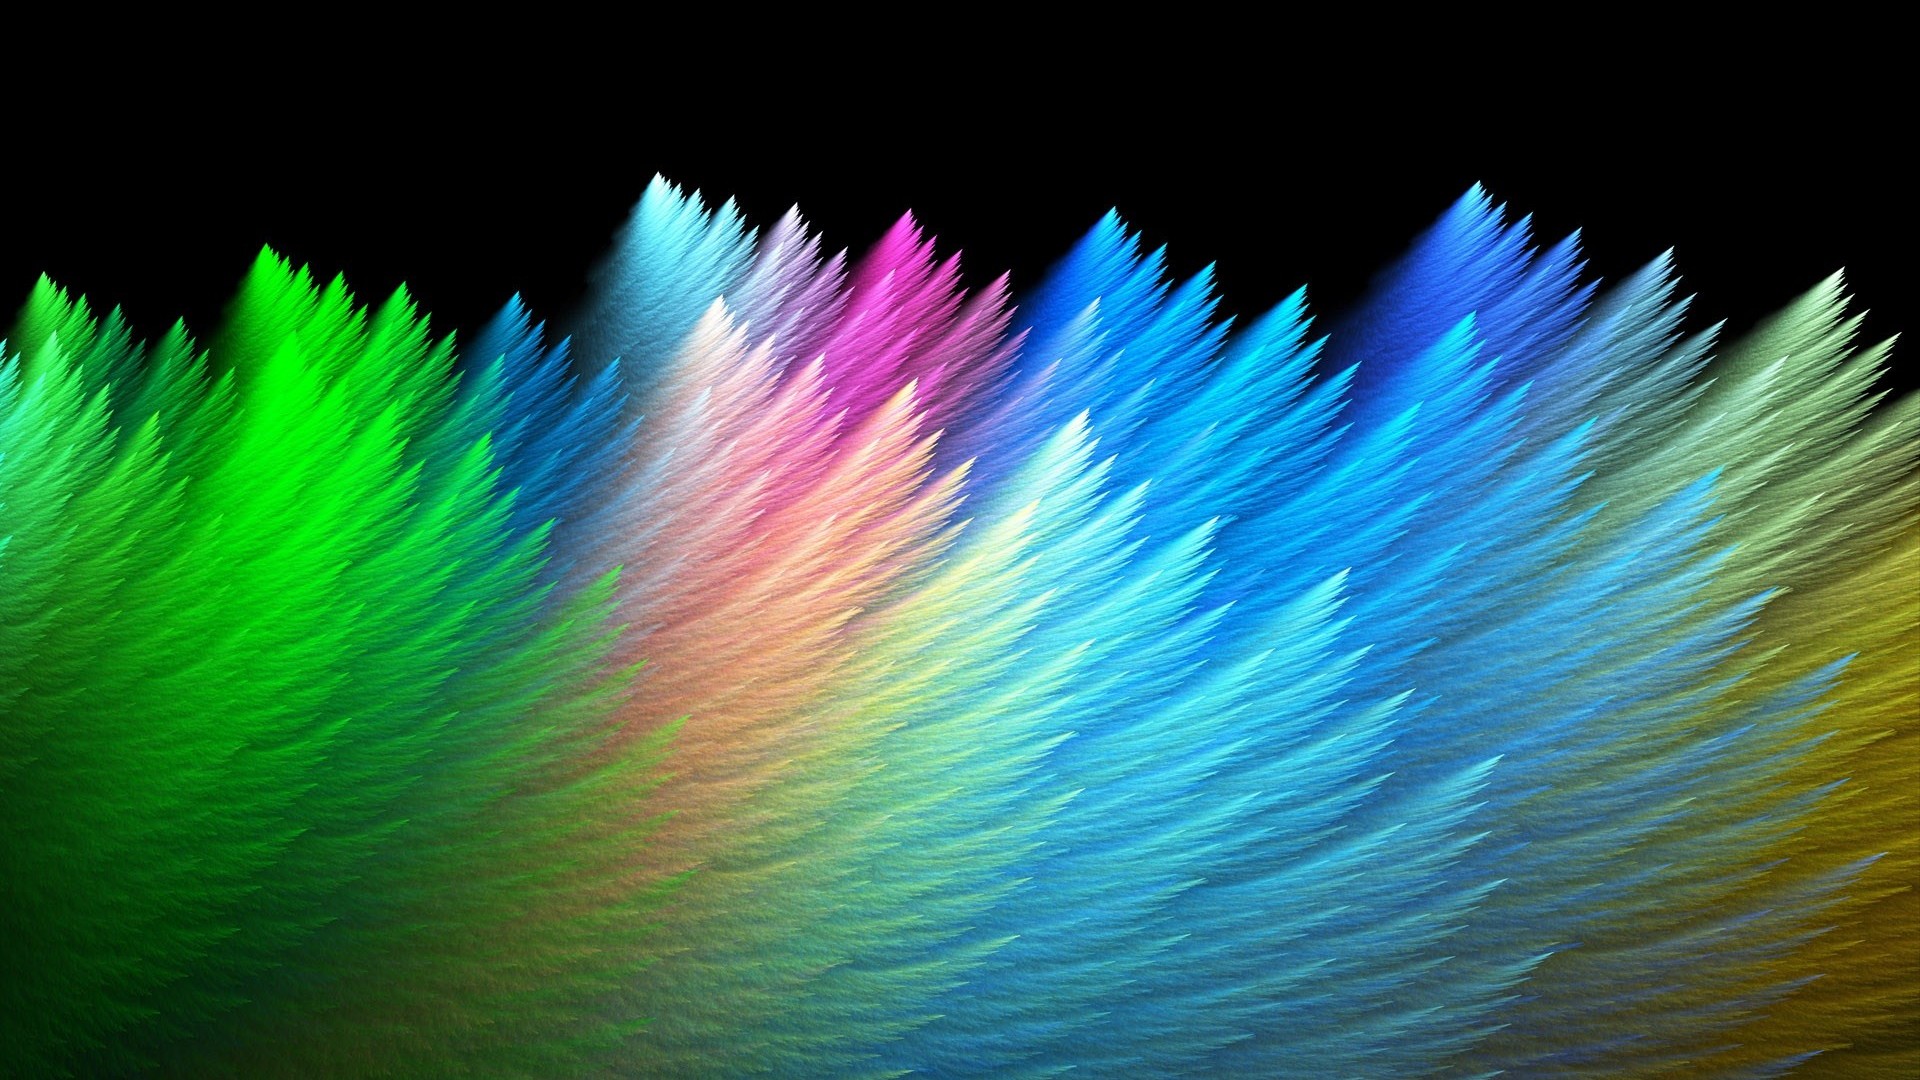 HD Wallpaper Trippy With Resolution 1920X1080